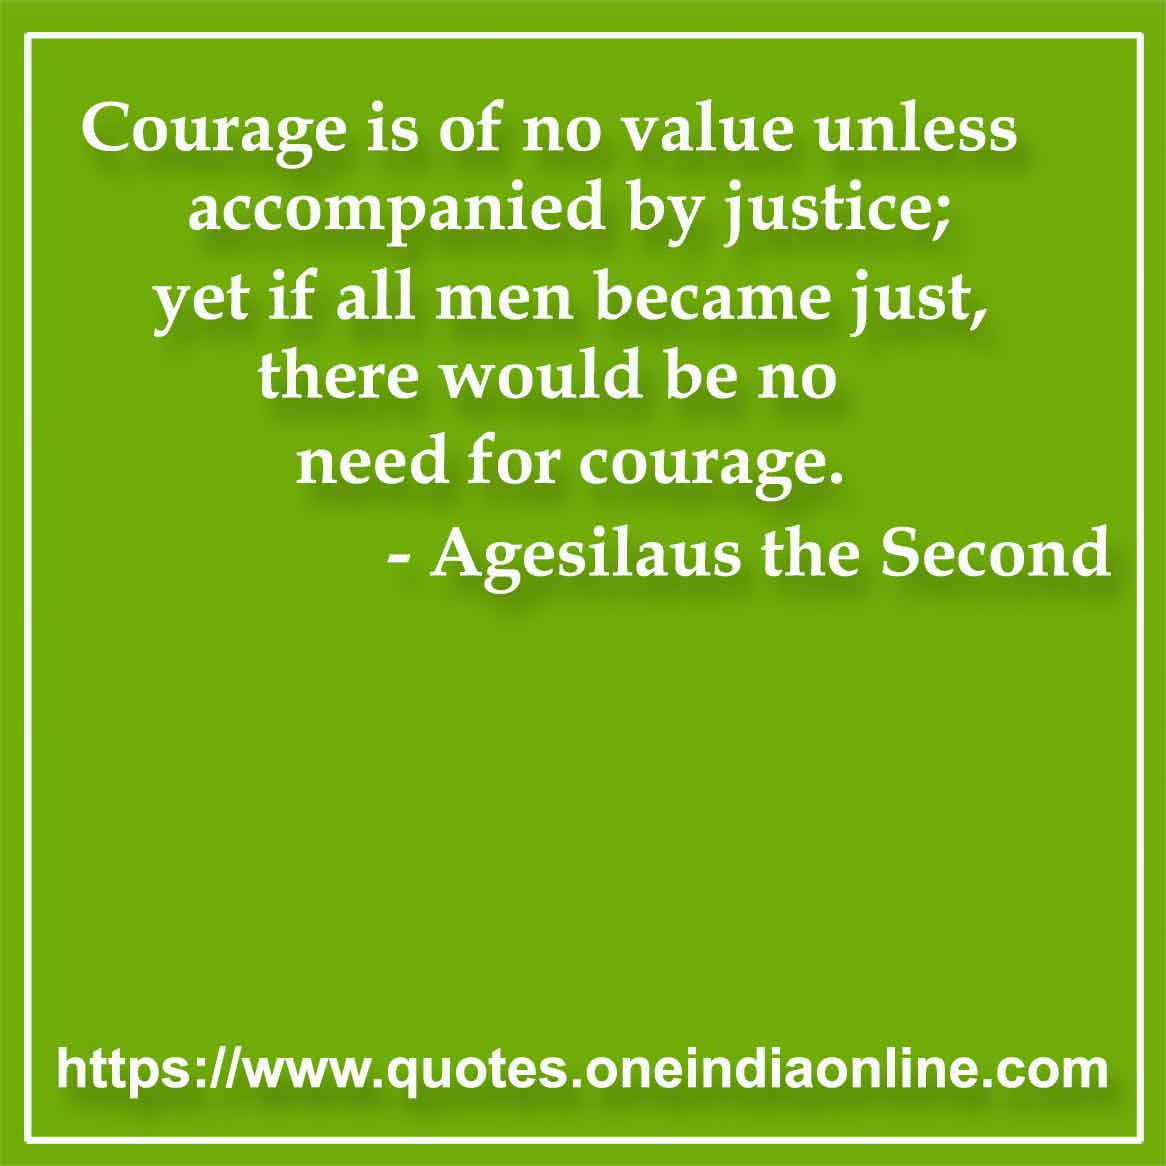 Courage is of no value unless accompanied by justice; yet if all men became just, there would be no need for courage.

- Justice Quotes by Agesilaus the Second